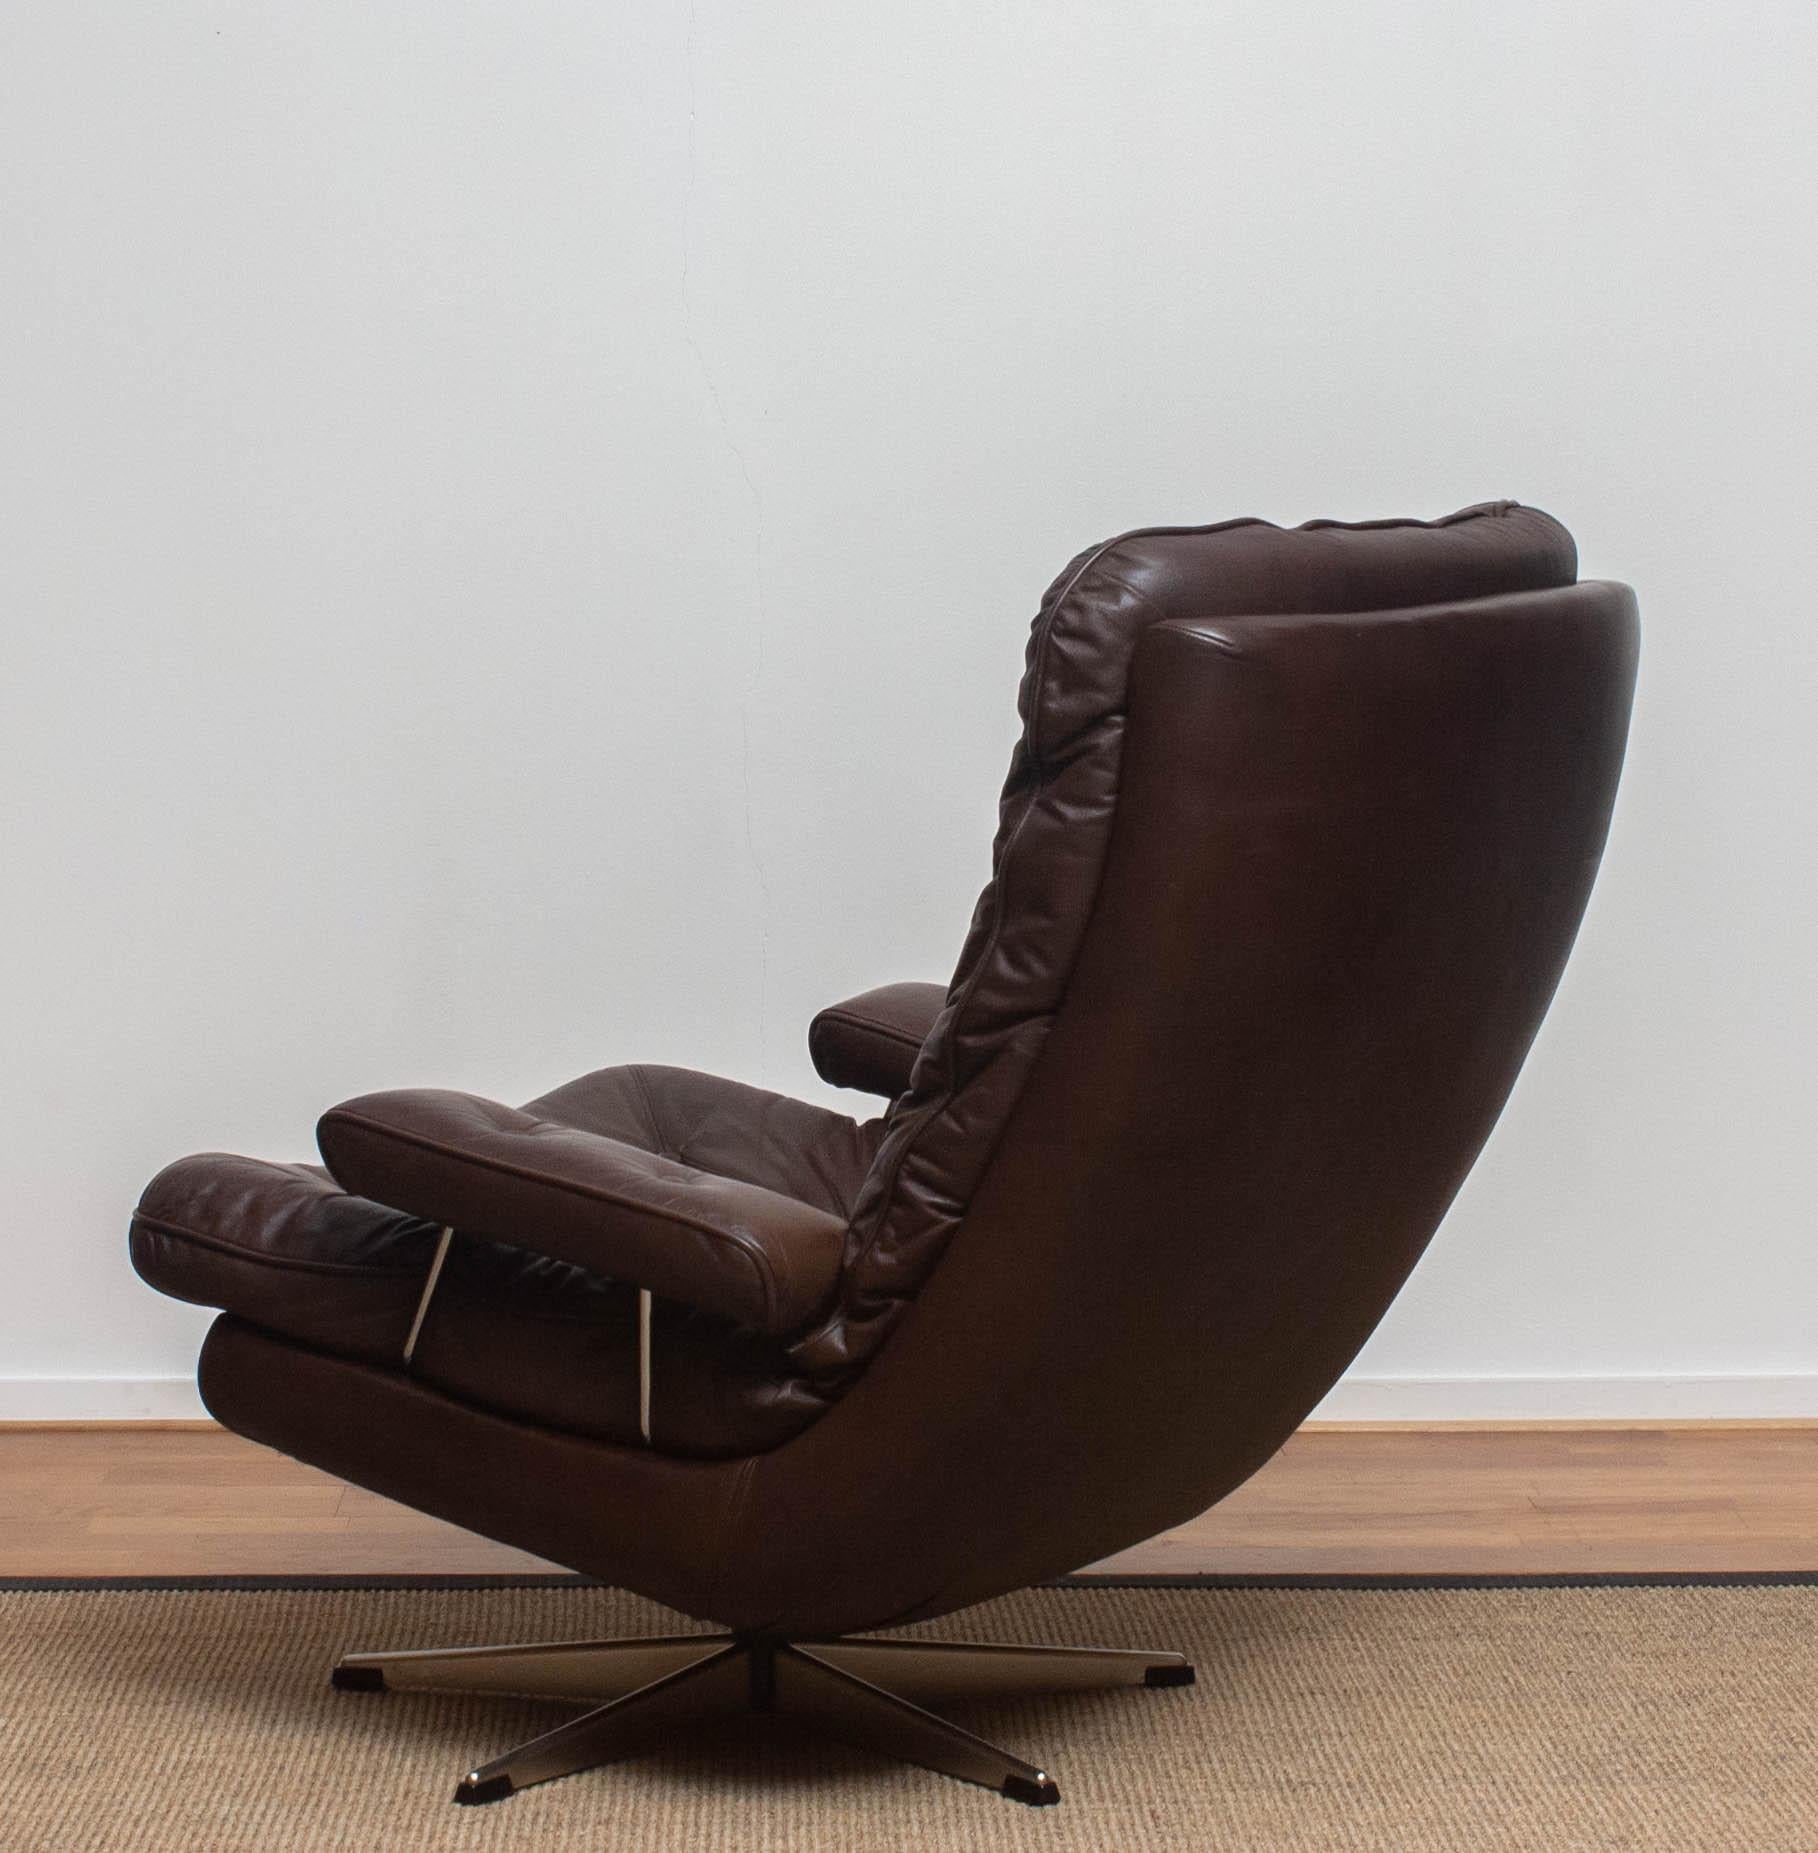 Late 20th Century 1970s, Brown Leather and Chrome Swivel Lounge Chair and Ottoman, Sweden